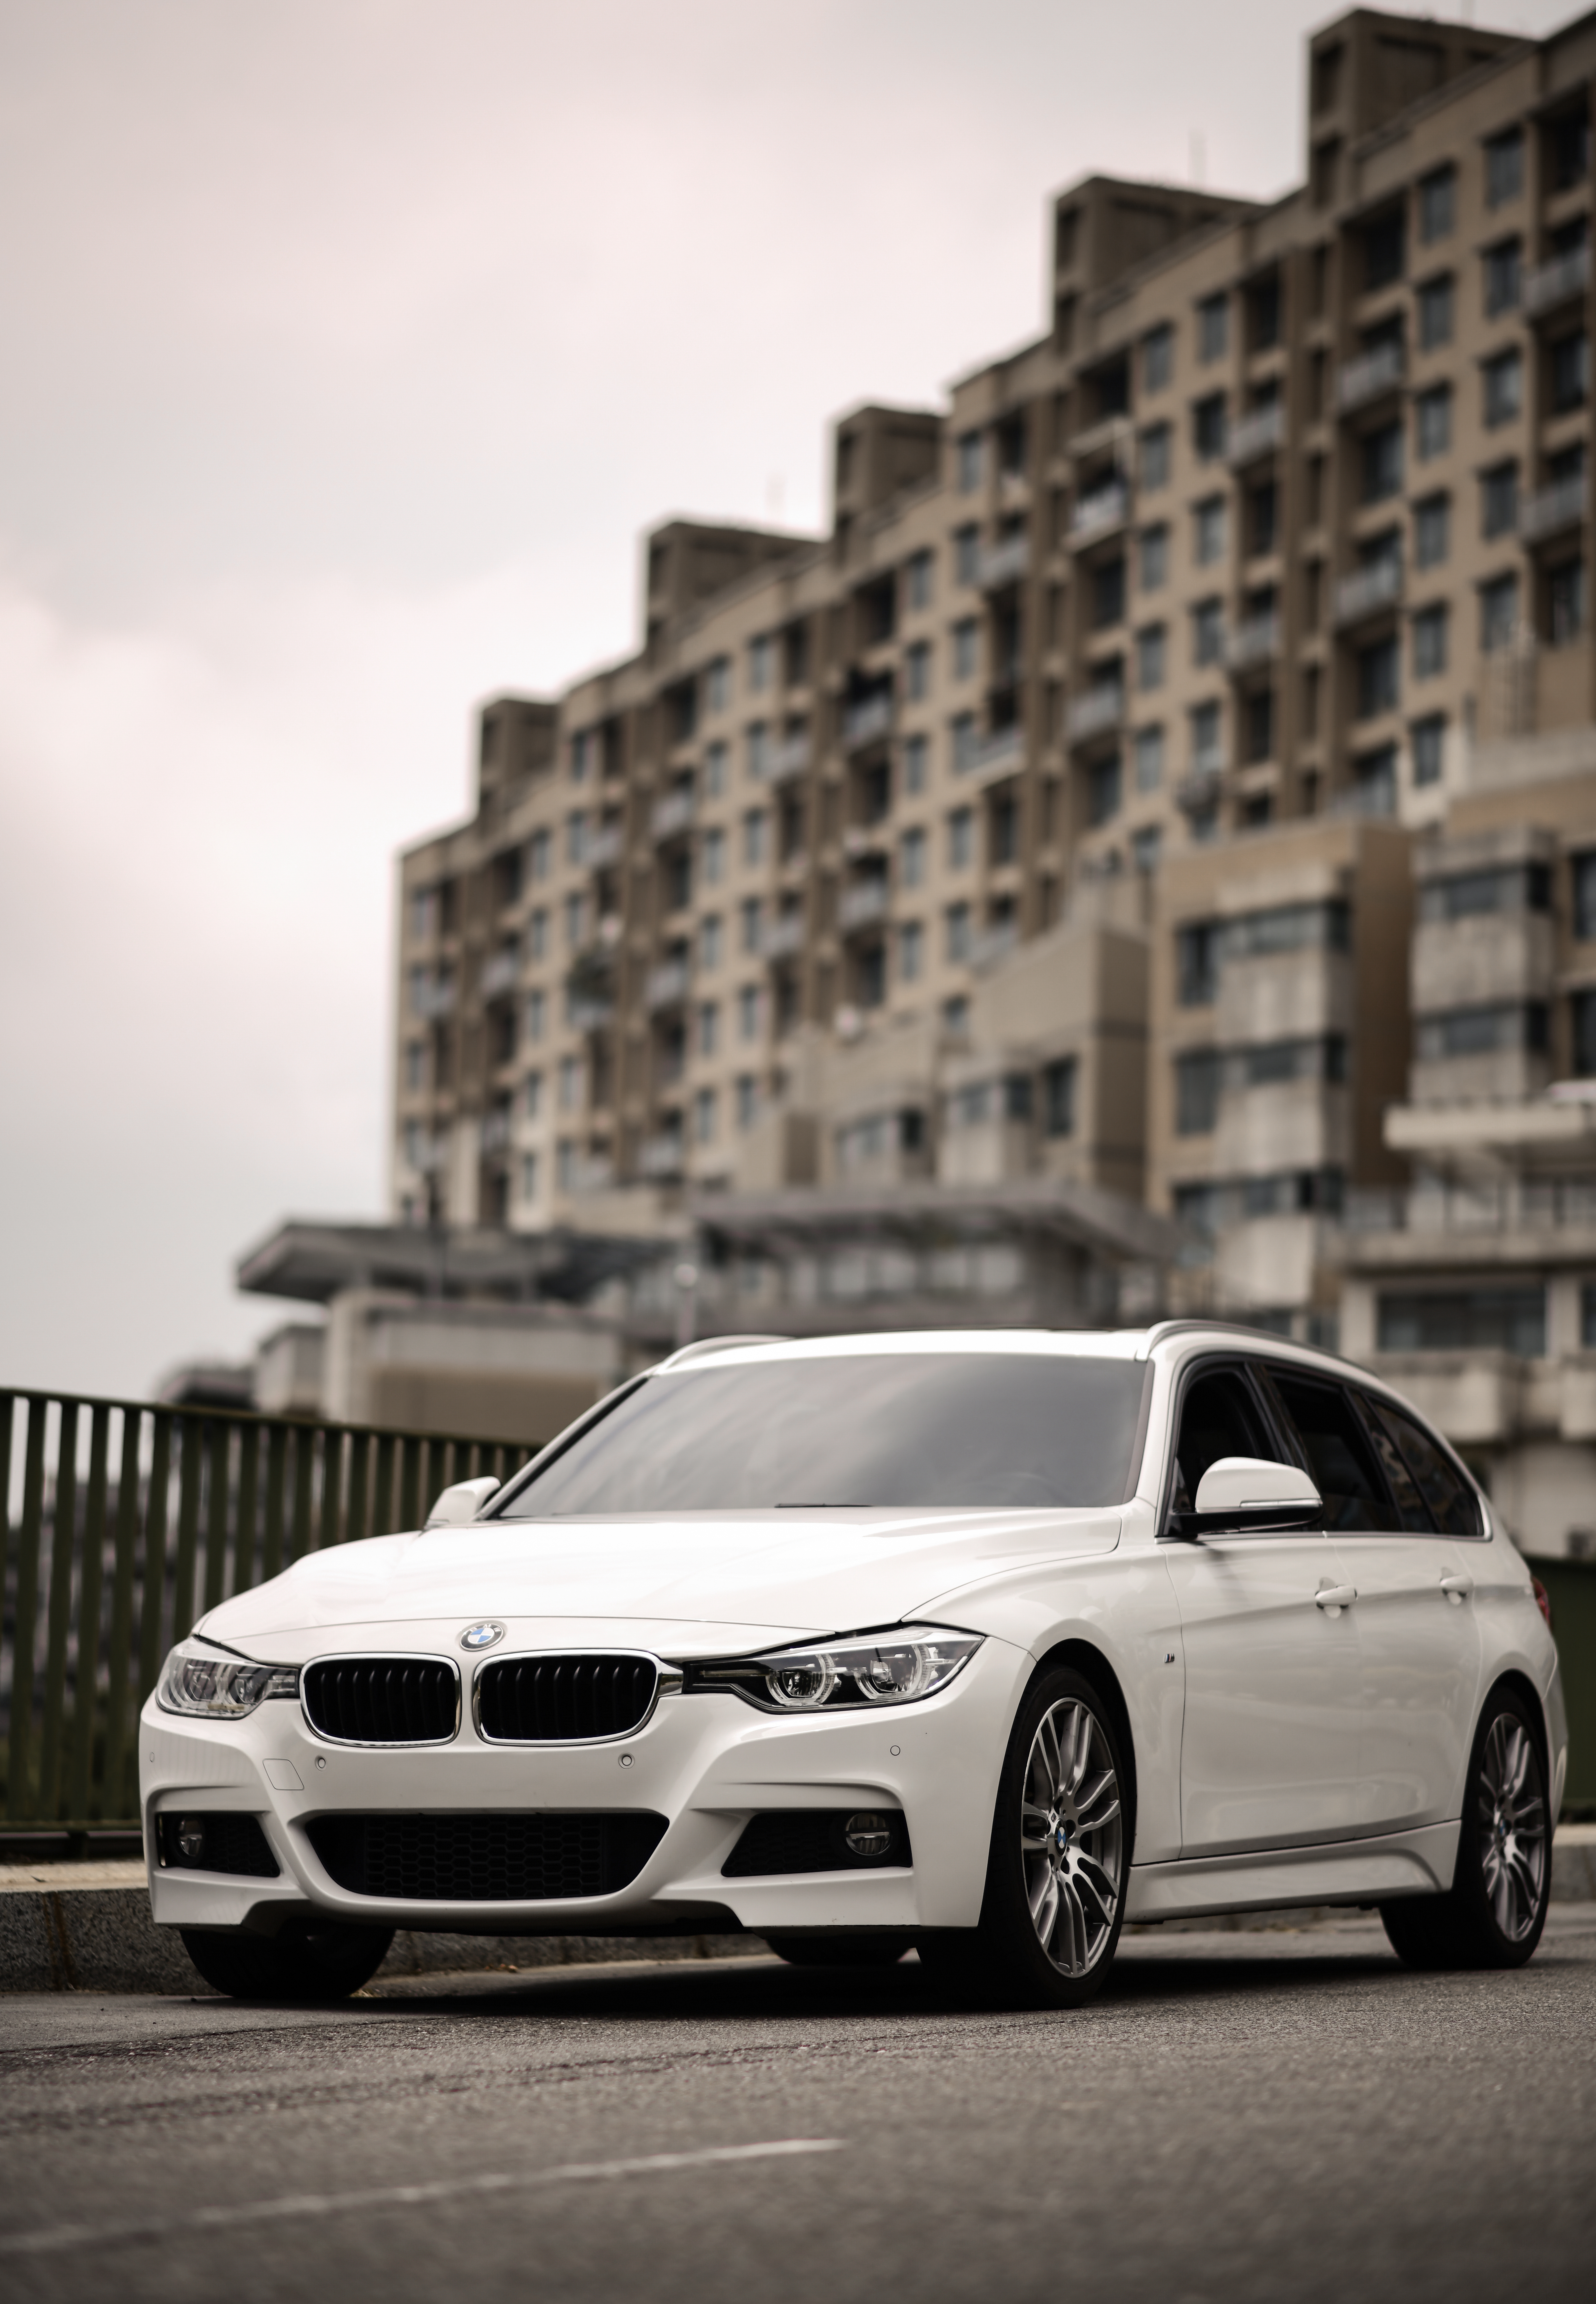 83860 free download White wallpapers for phone, bmw, bmw 320i, city, machine White images and screensavers for mobile